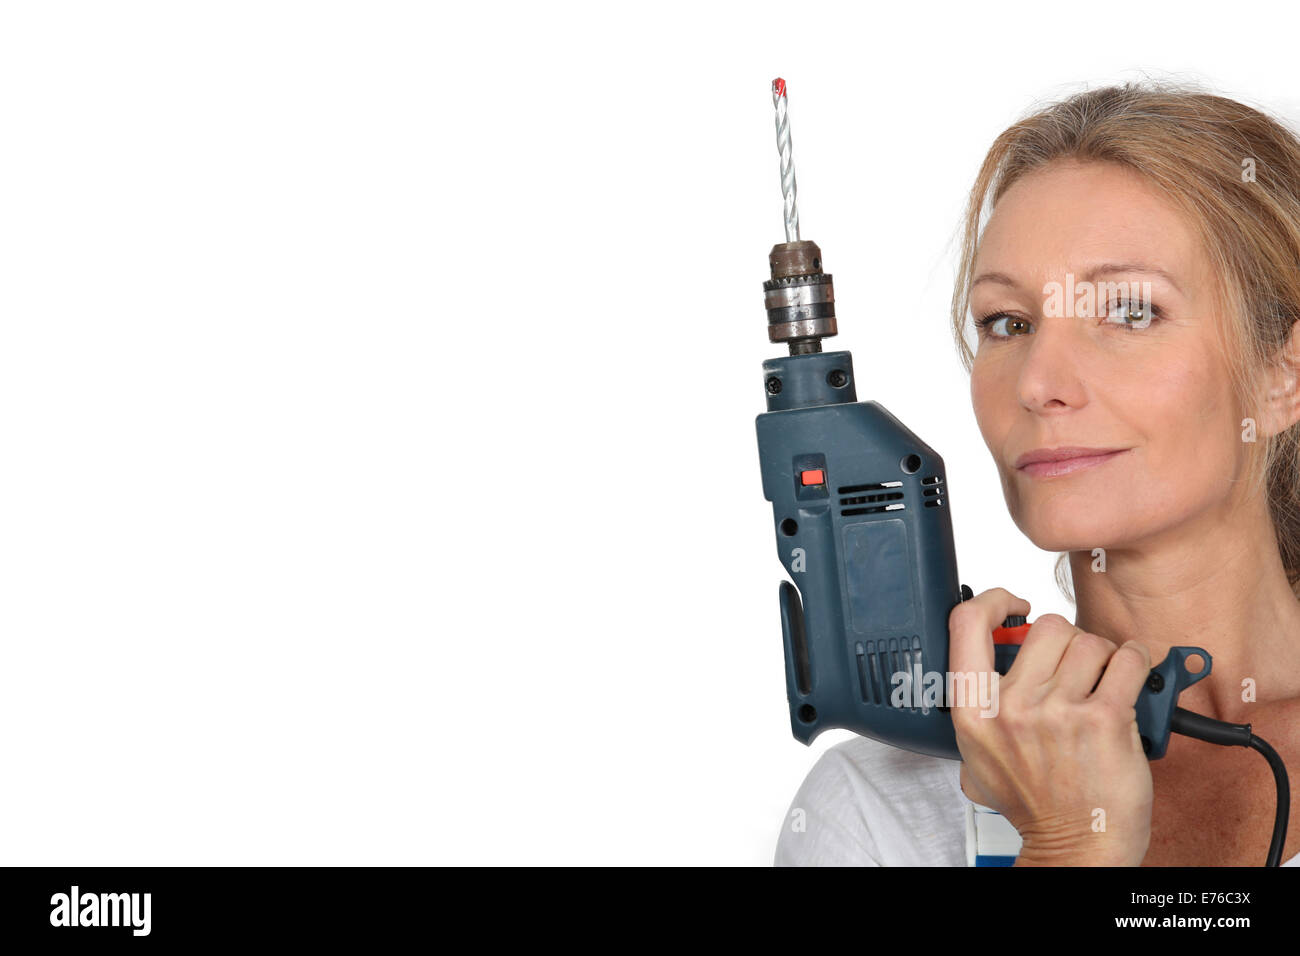 Blond woman holding electric drill Banque D'Images